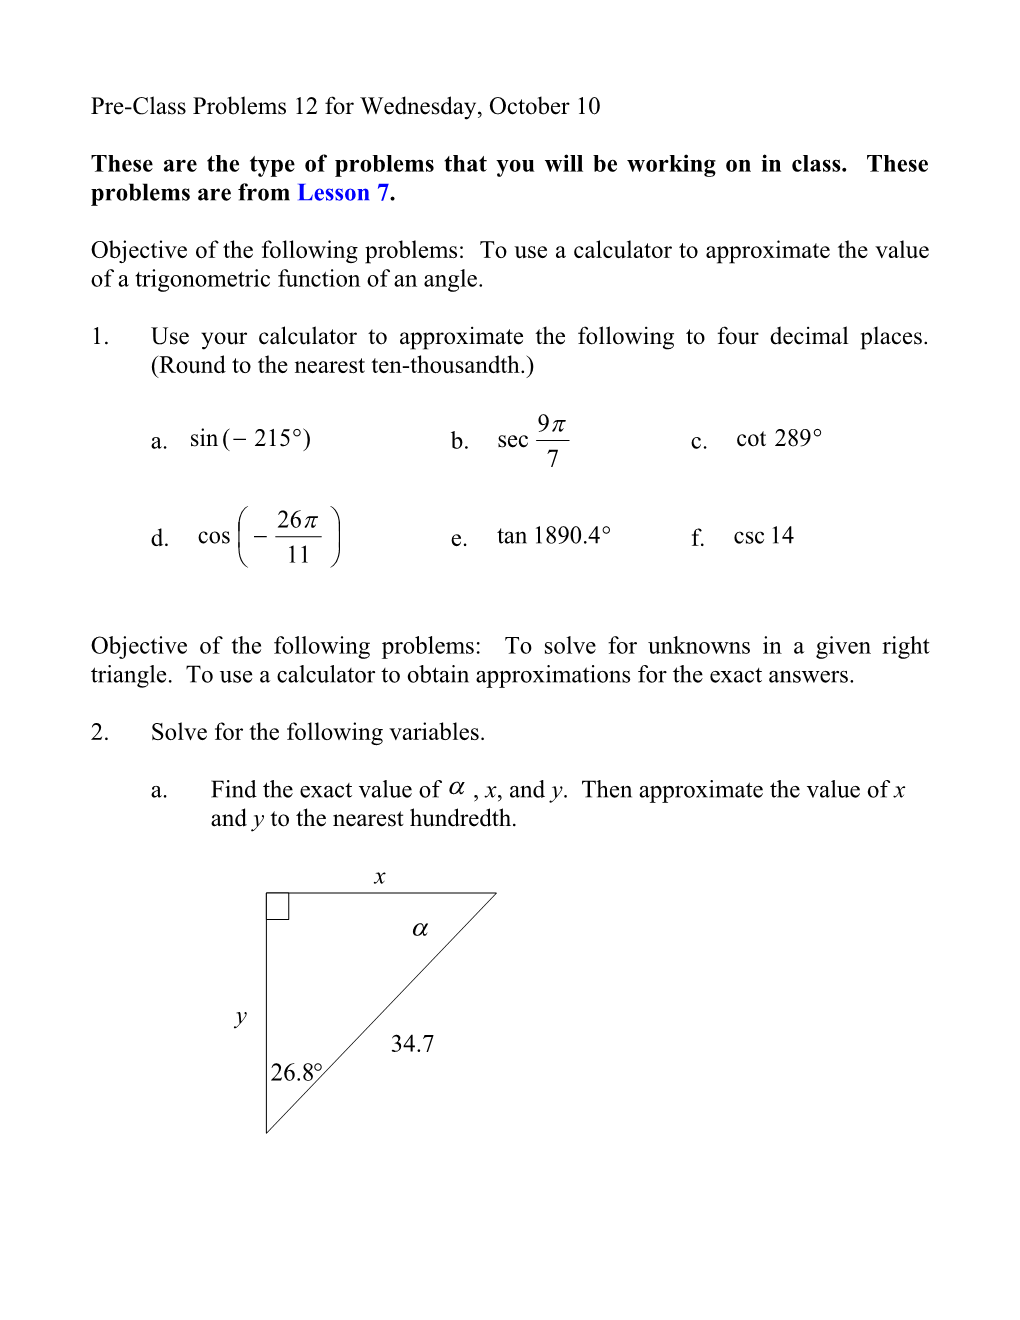 Pre-Class Problems 12 for Wednesday, October 10